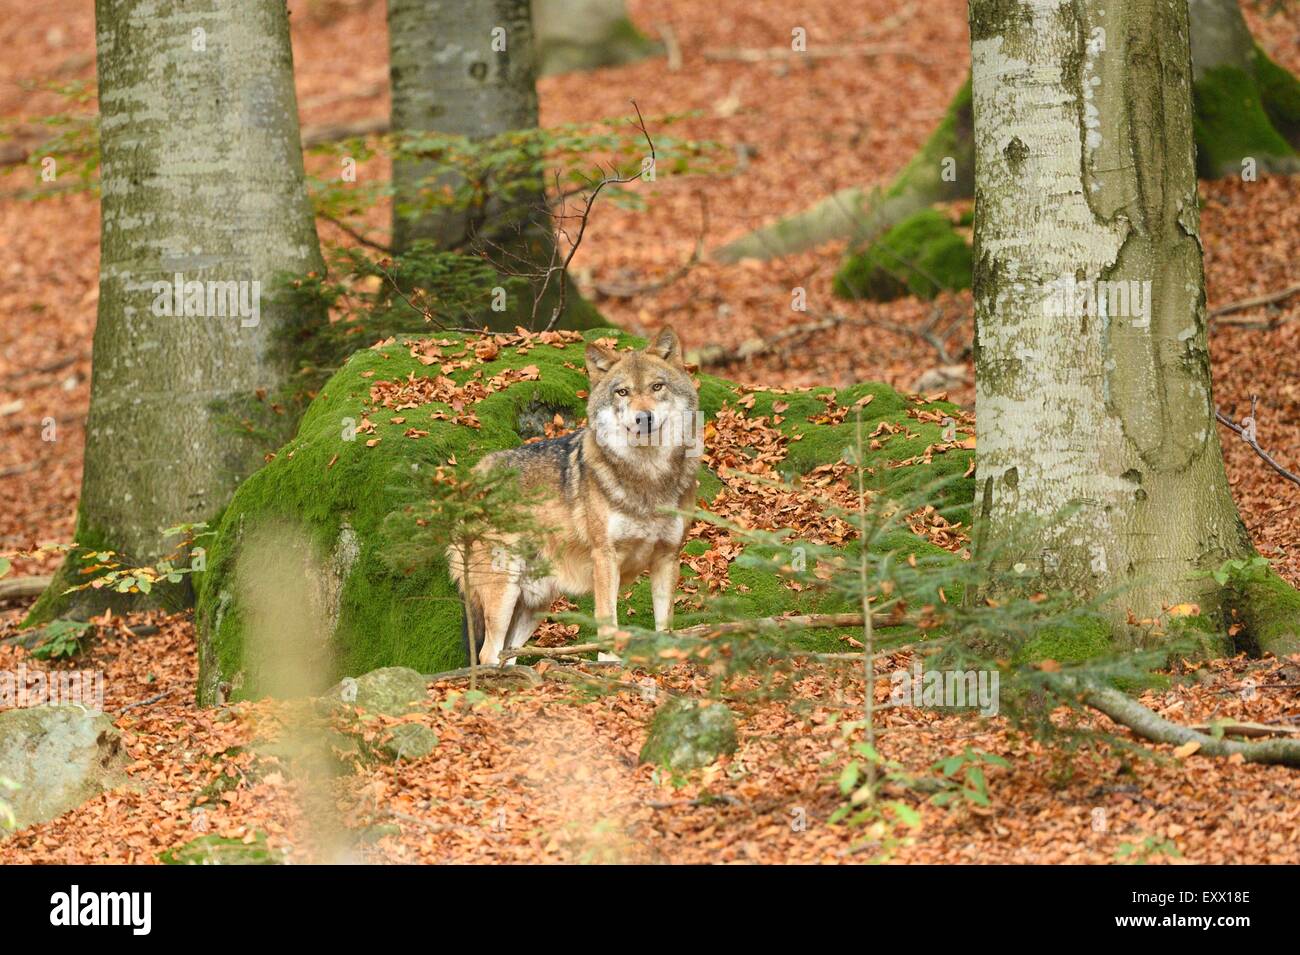 Eurasian wolf in a forest Stock Photo